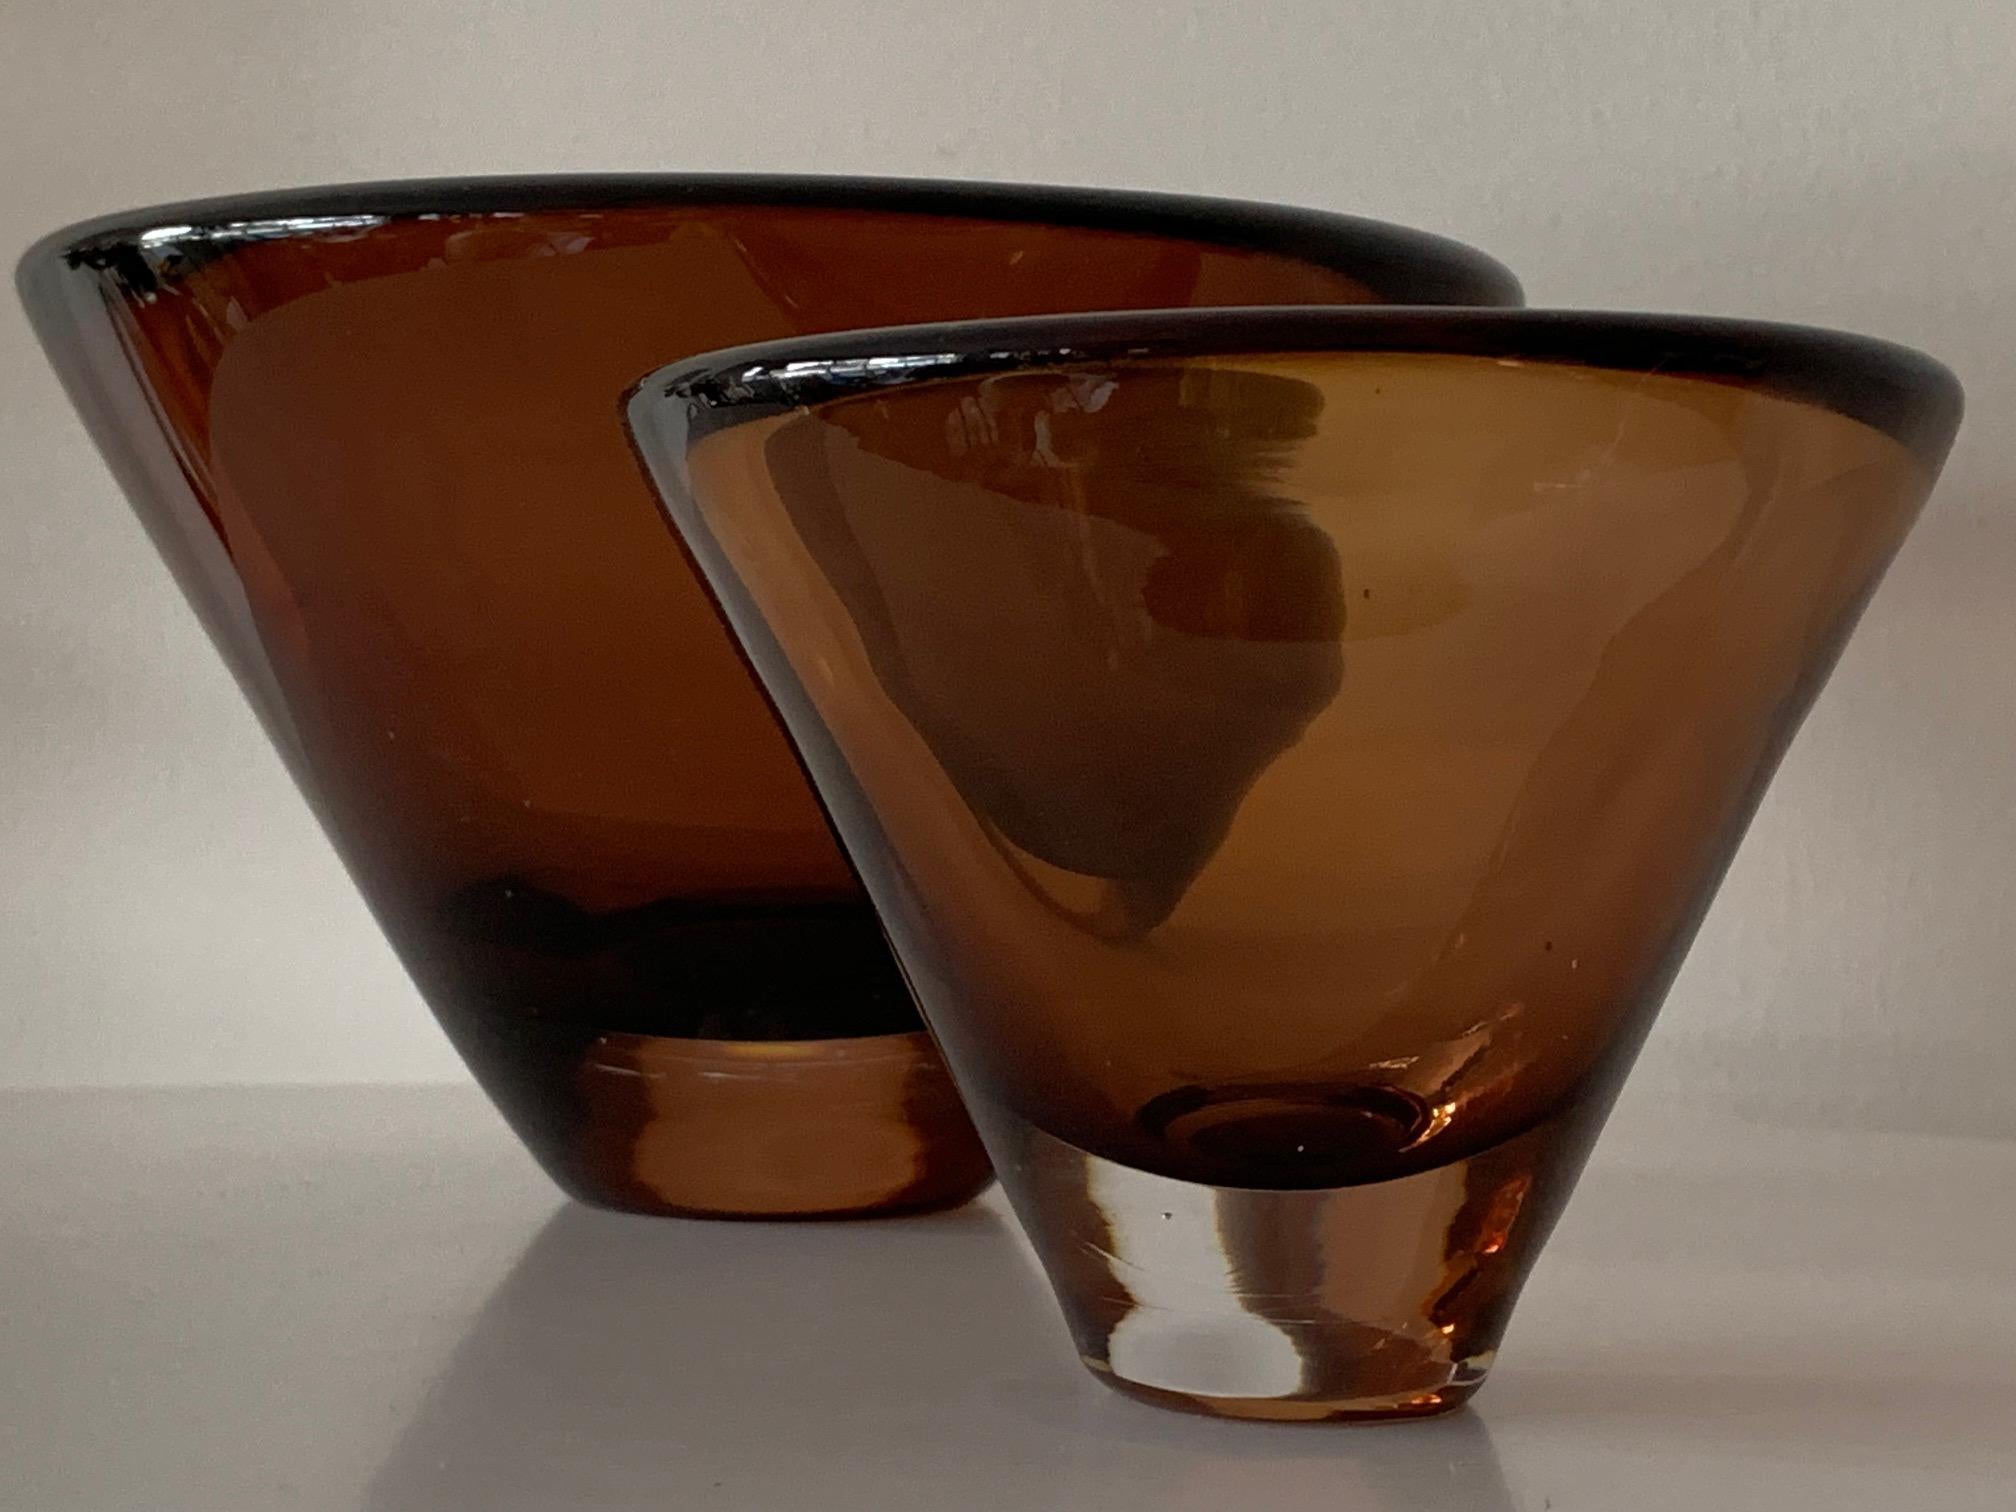 Unusual glass vessels by Vicke Lindstrand for Kosta Boda, signed # 5599 and # 55997. Beautiful dark brown color in Sommerso style, circa 1960s.